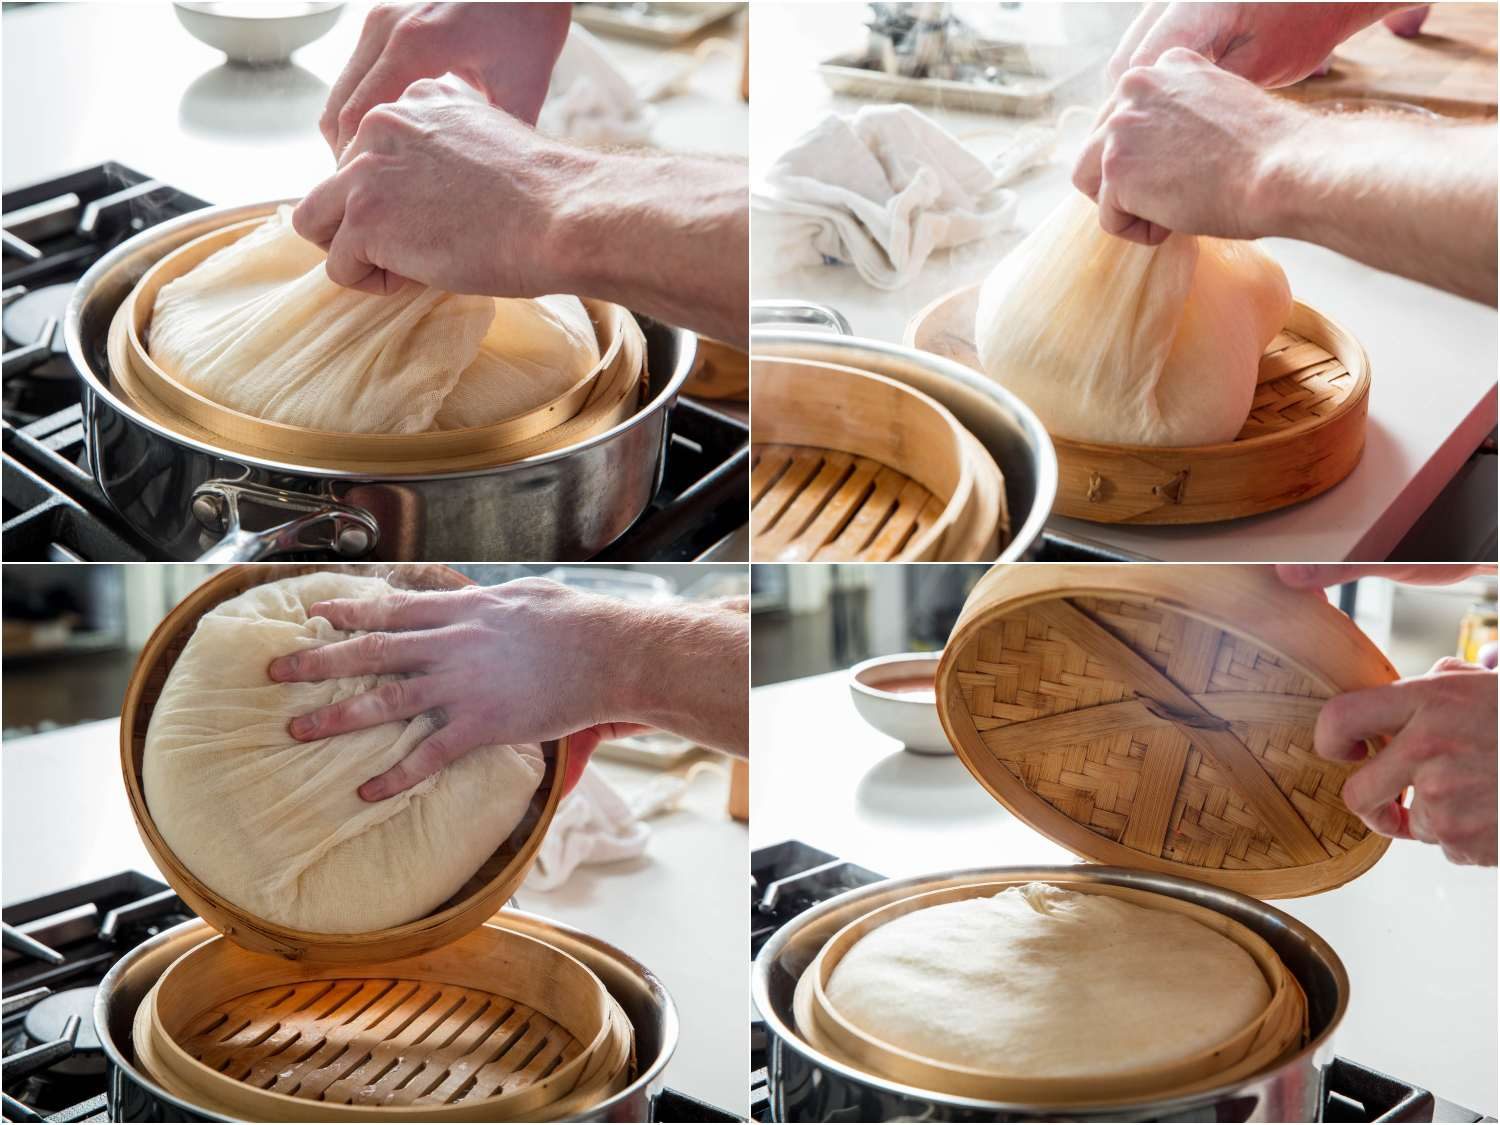 Process shots of flipping over cheesecloth parcel of sticky rice midway through cooking process.